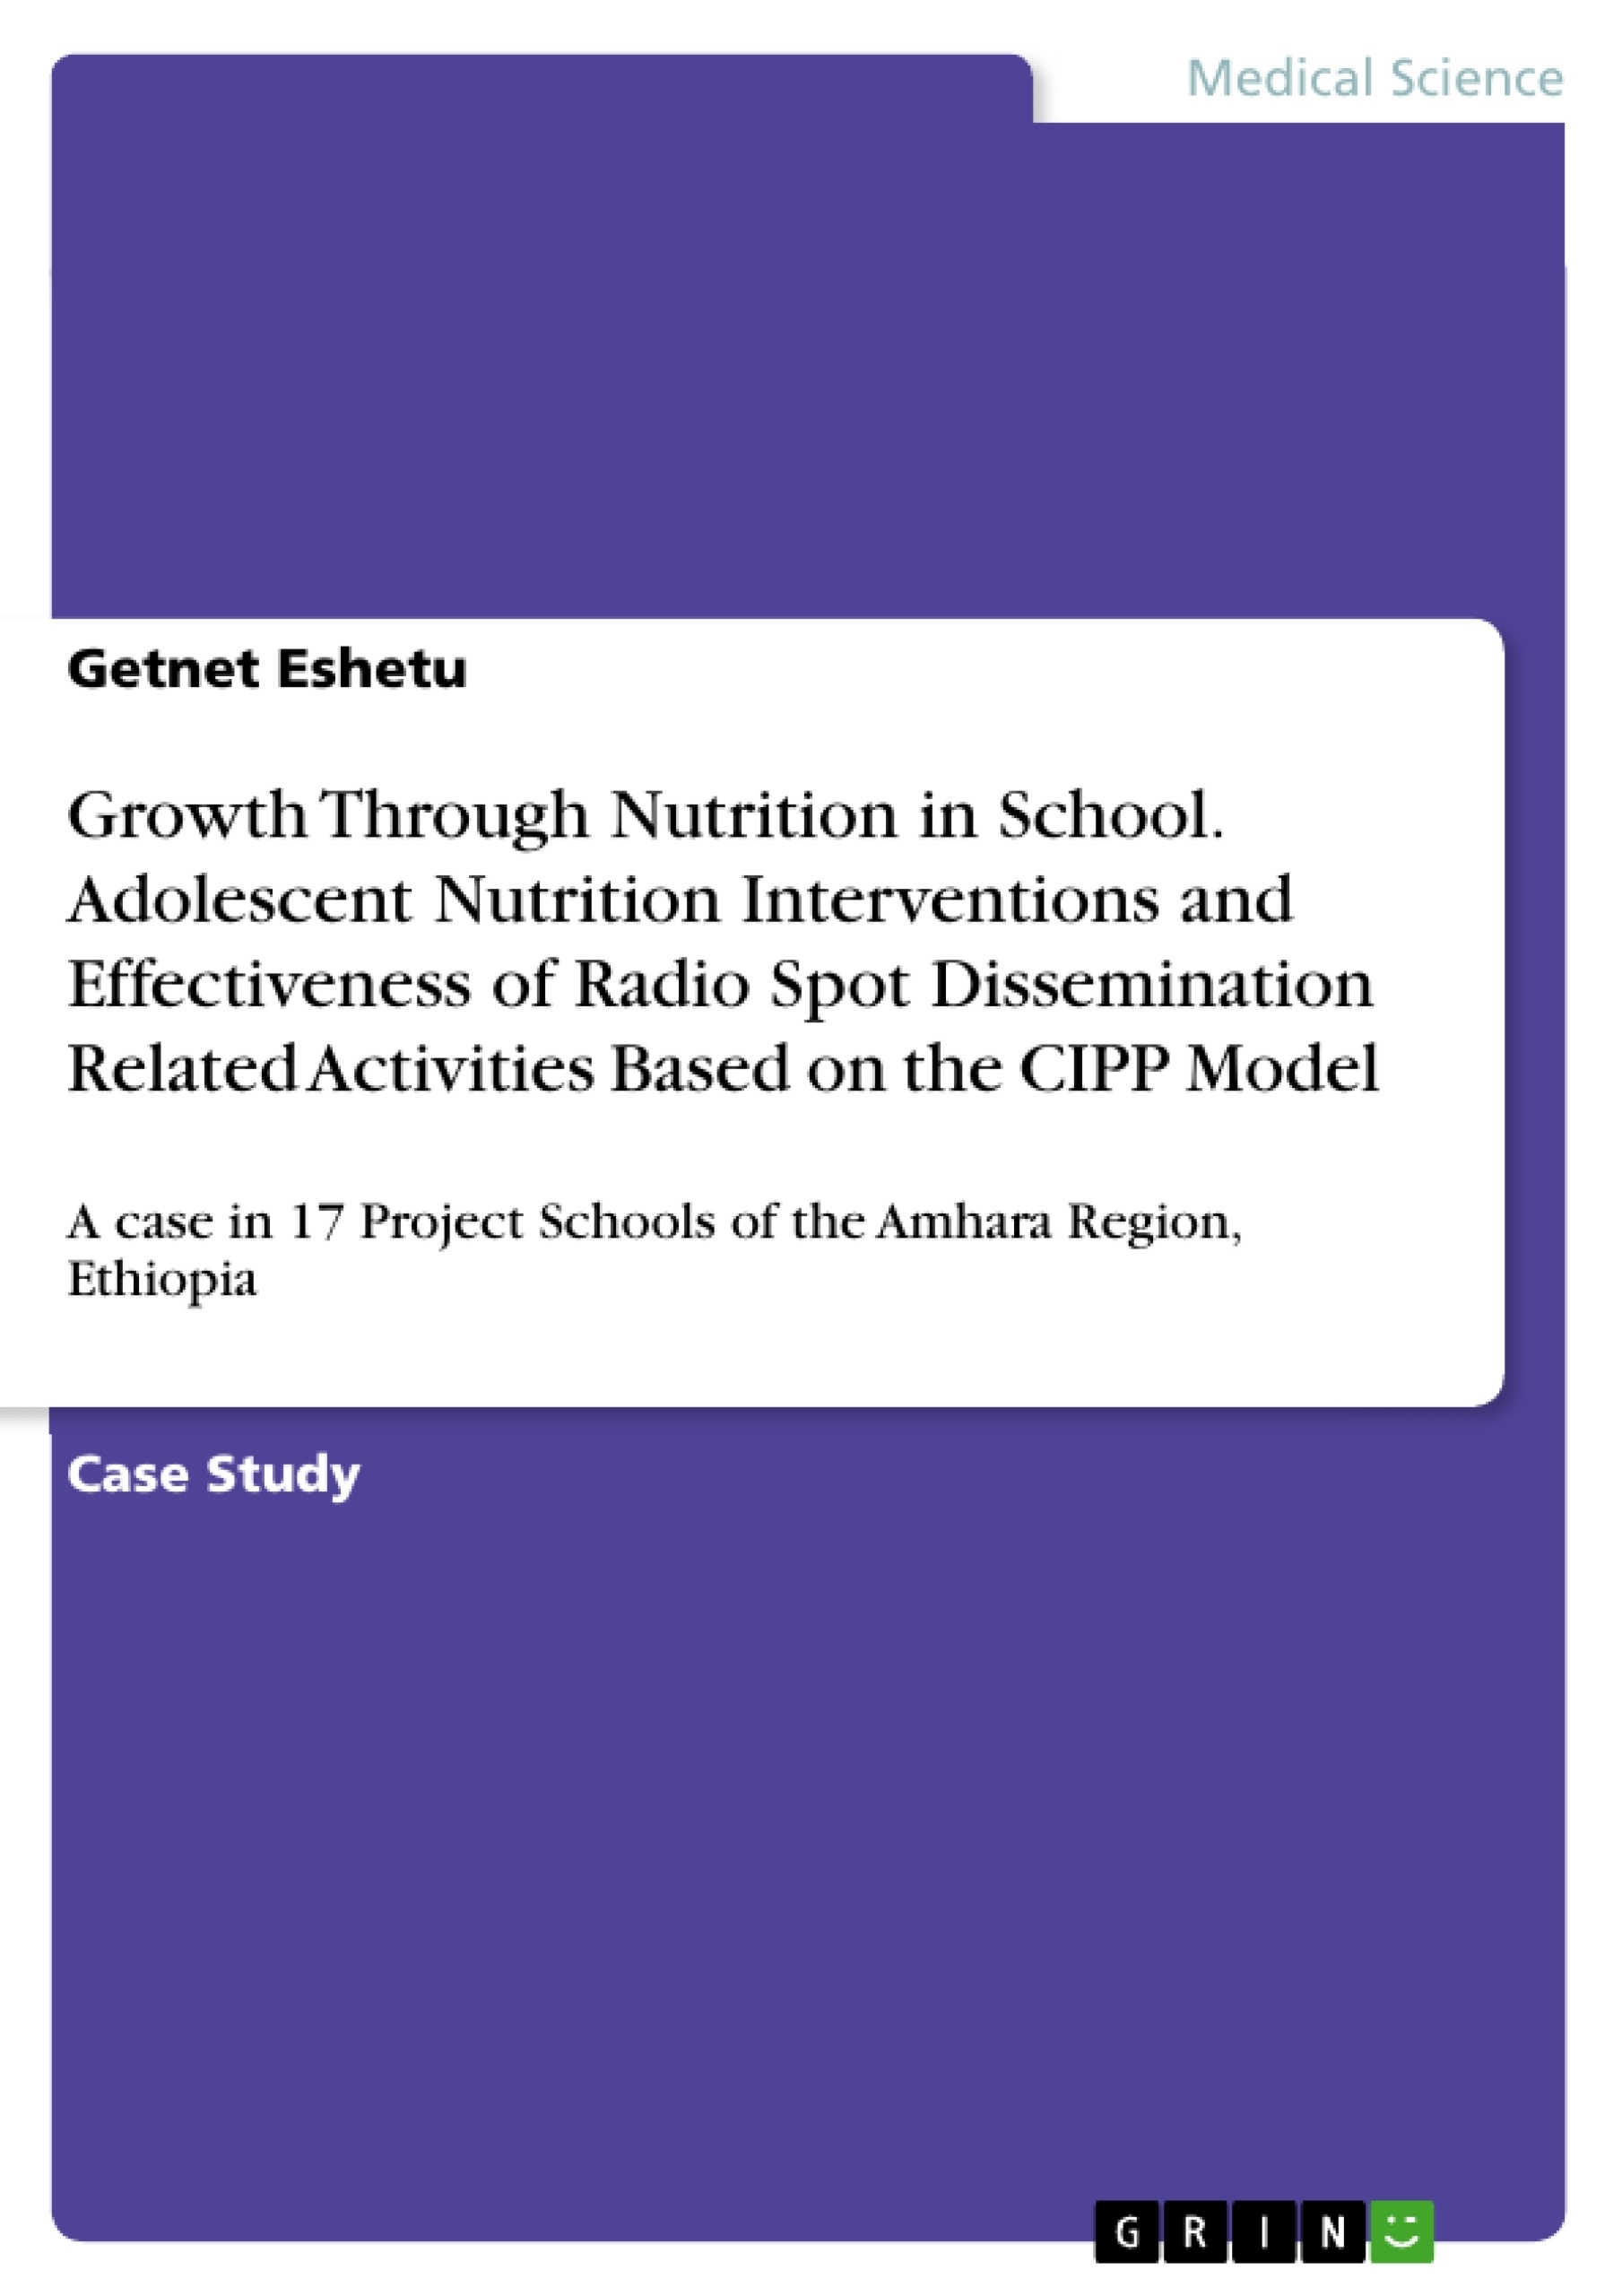 Title: Growth Through Nutrition in School. Adolescent Nutrition Interventions and Effectiveness of Radio Spot Dissemination Related Activities Based on the CIPP Model